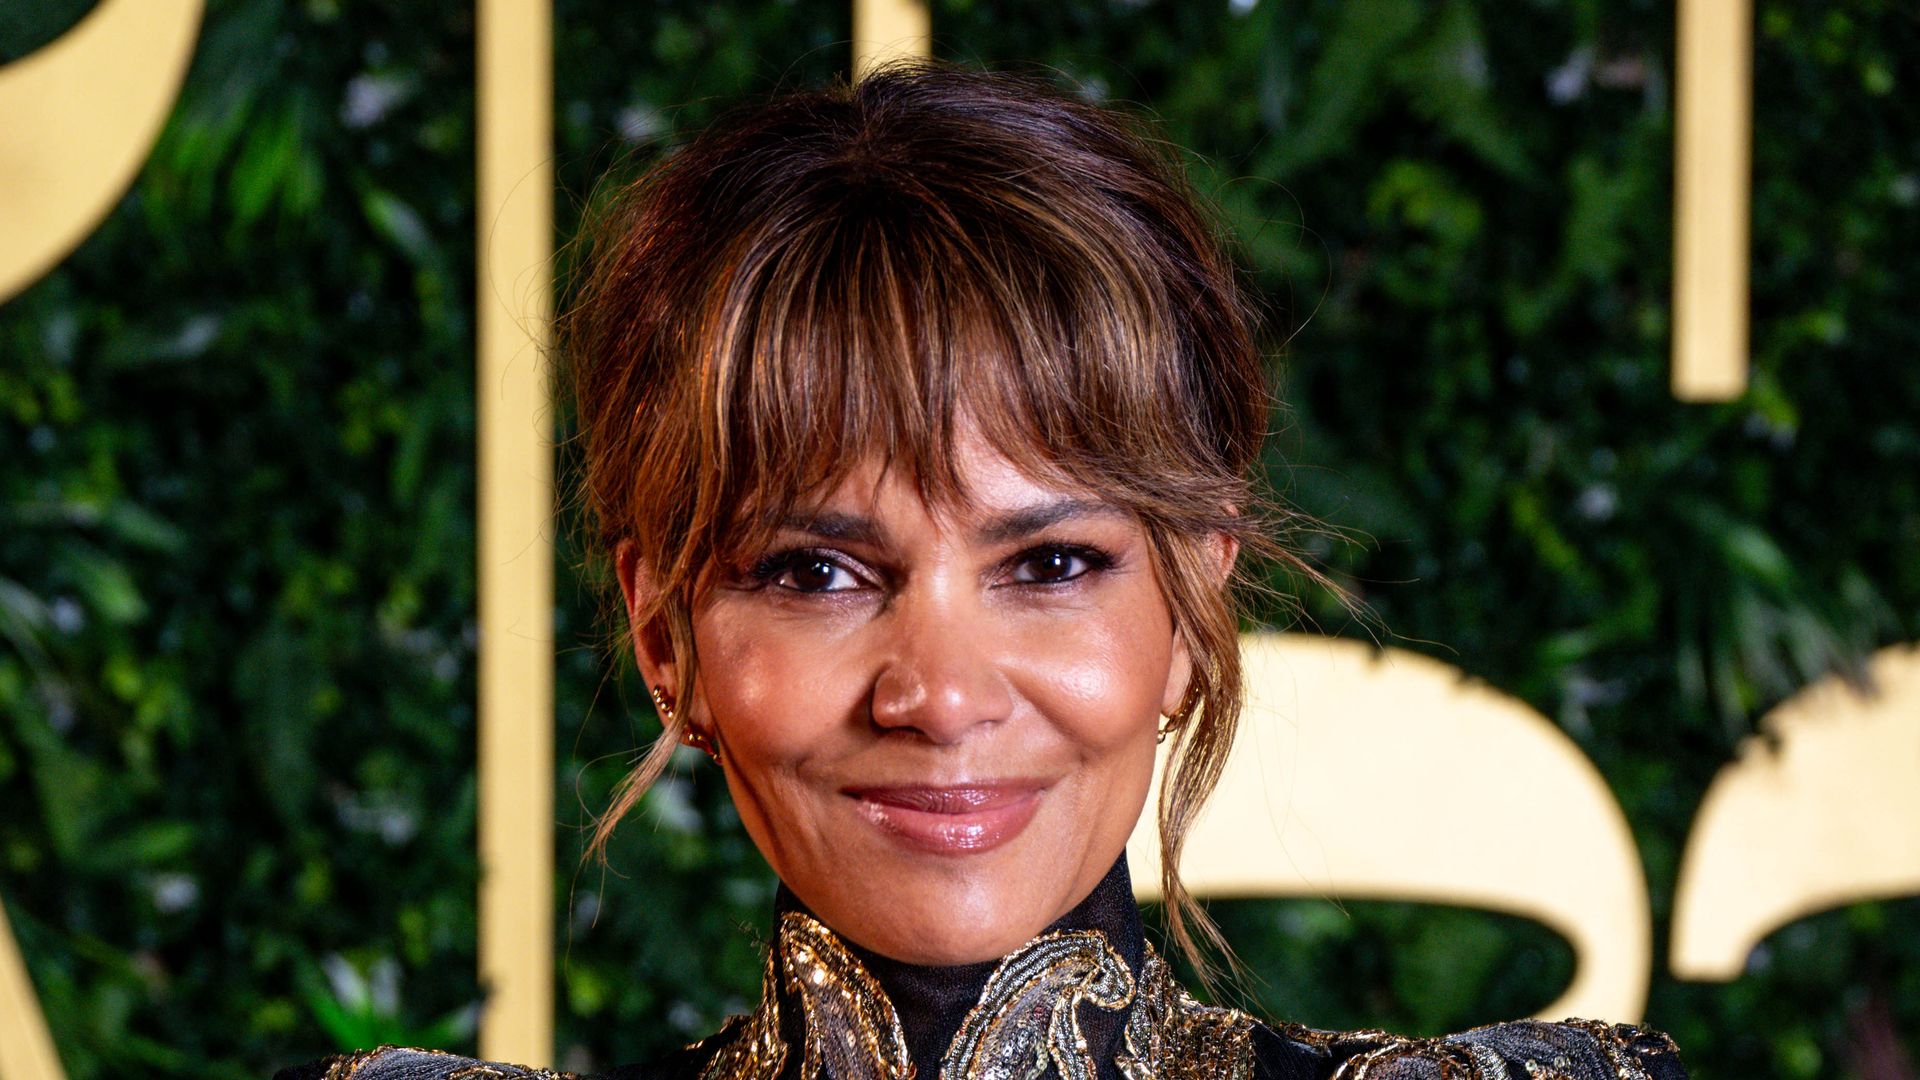 Halle Berry celebrates the 20th anniversary of 'Catwoman' with a daring photoshoot